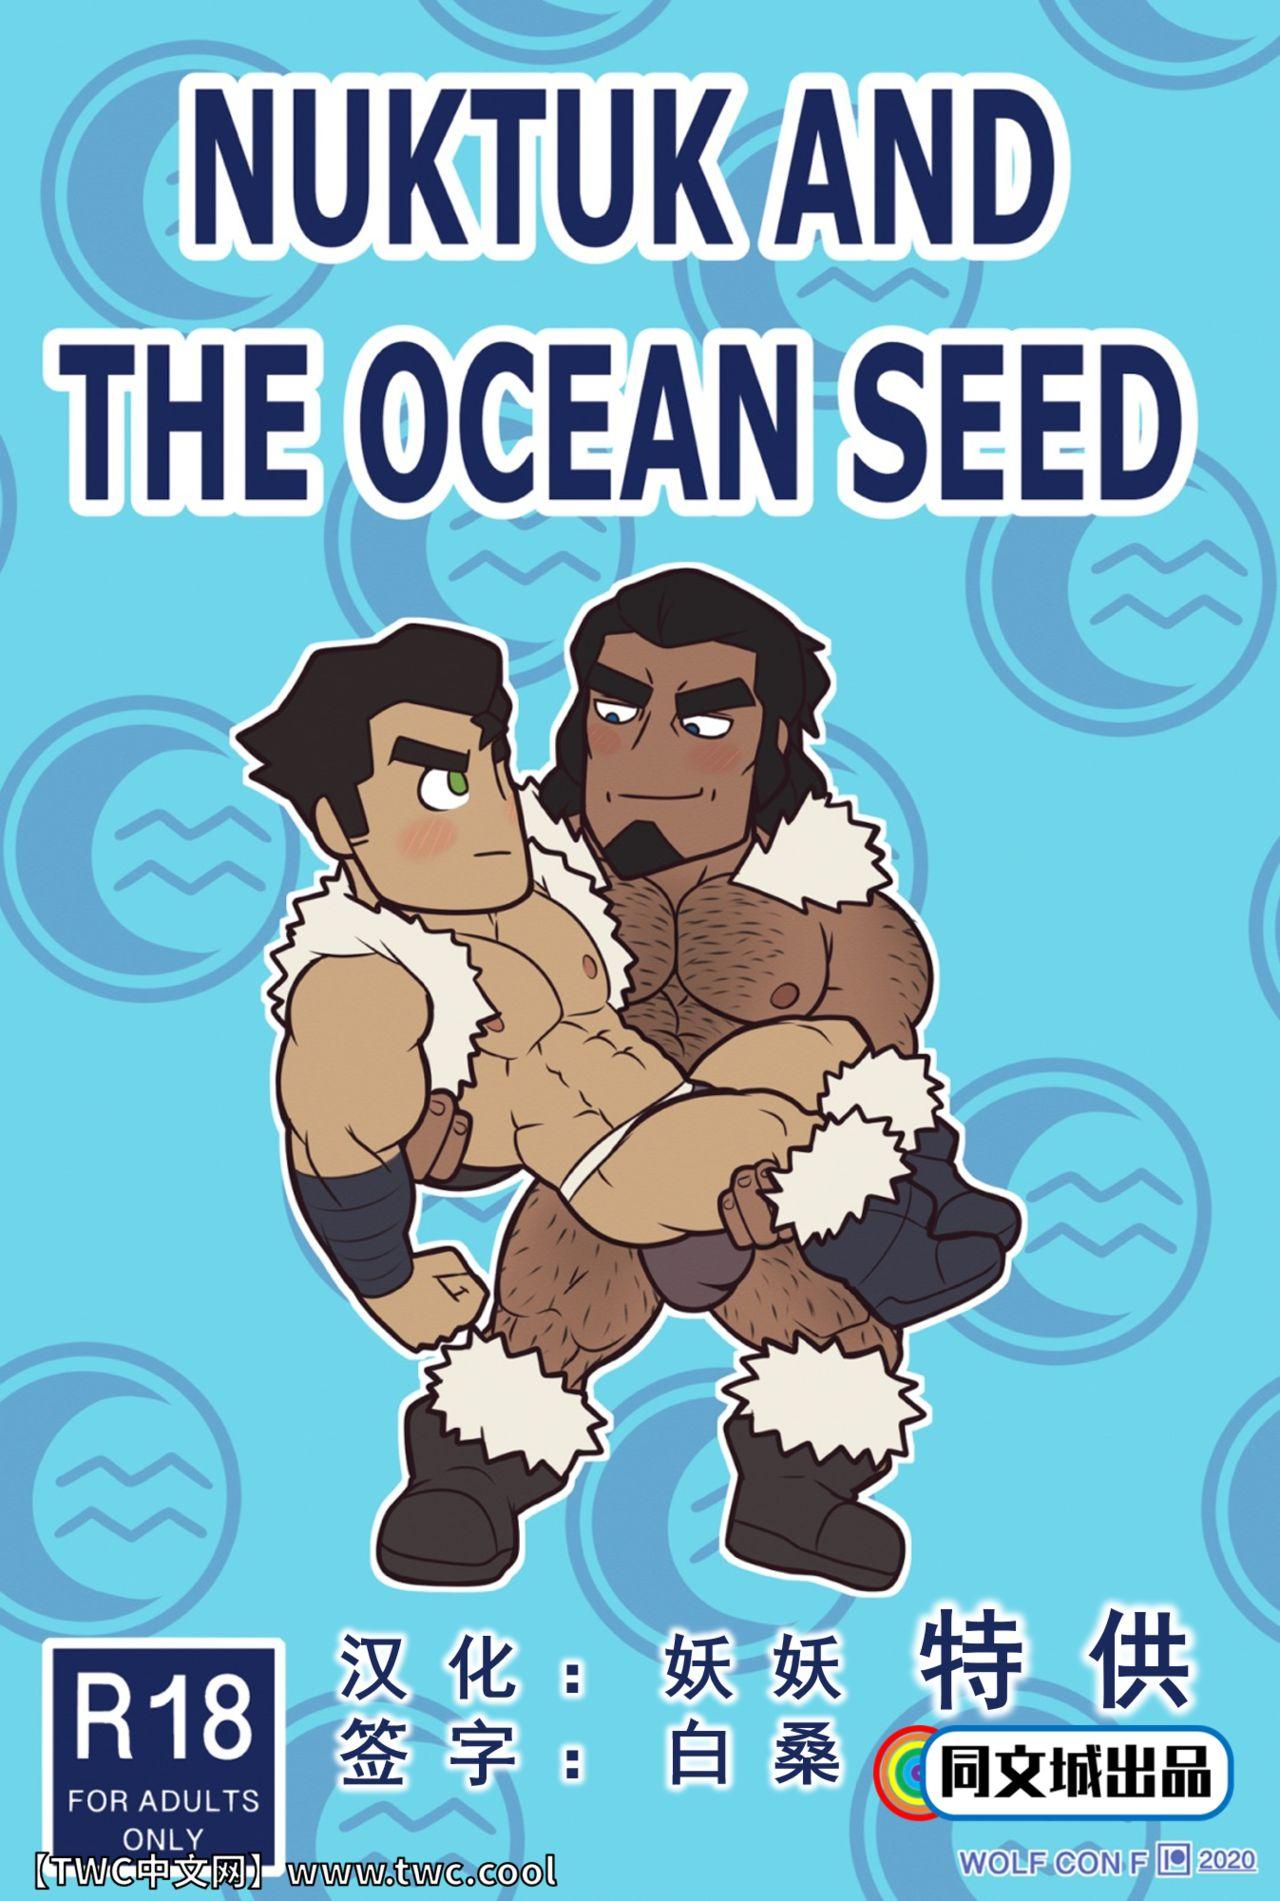 Rubdown NUKTUK AND OCEAN SEED - The legend of korra Body Massage - Page 1